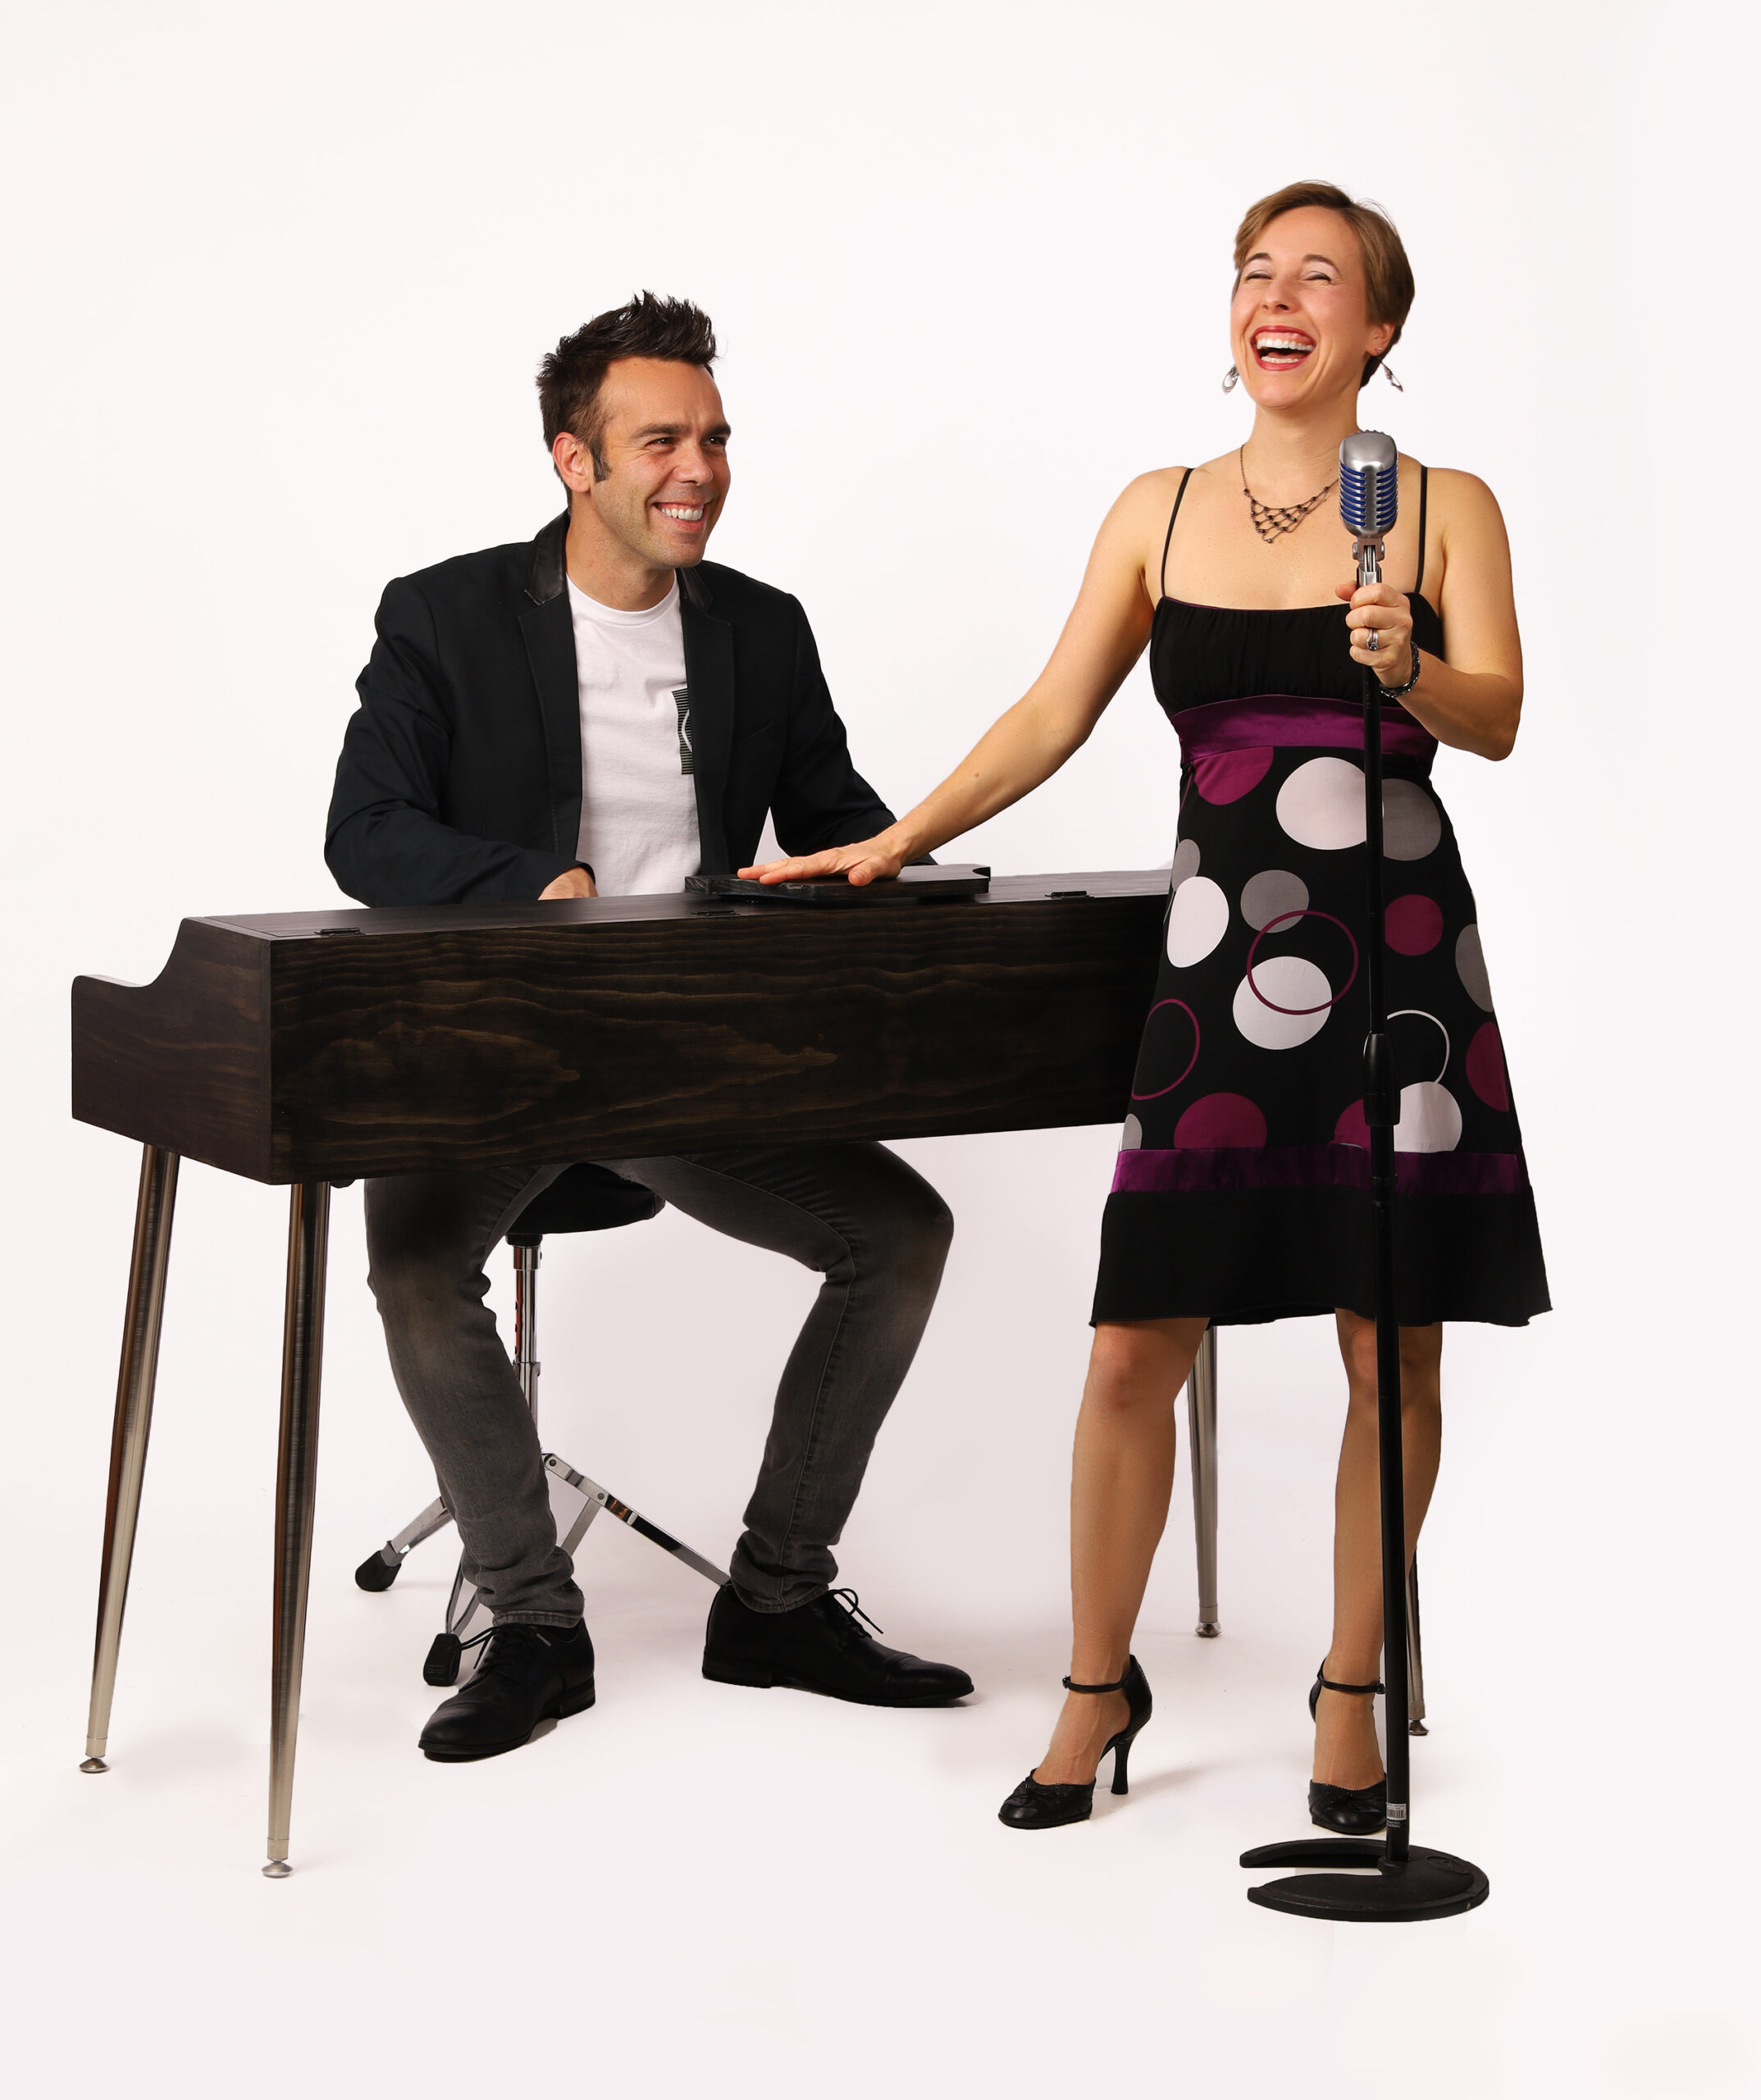 A Couple Duets - Jazz Performers - Paul and Brooke - musikcisalive.com